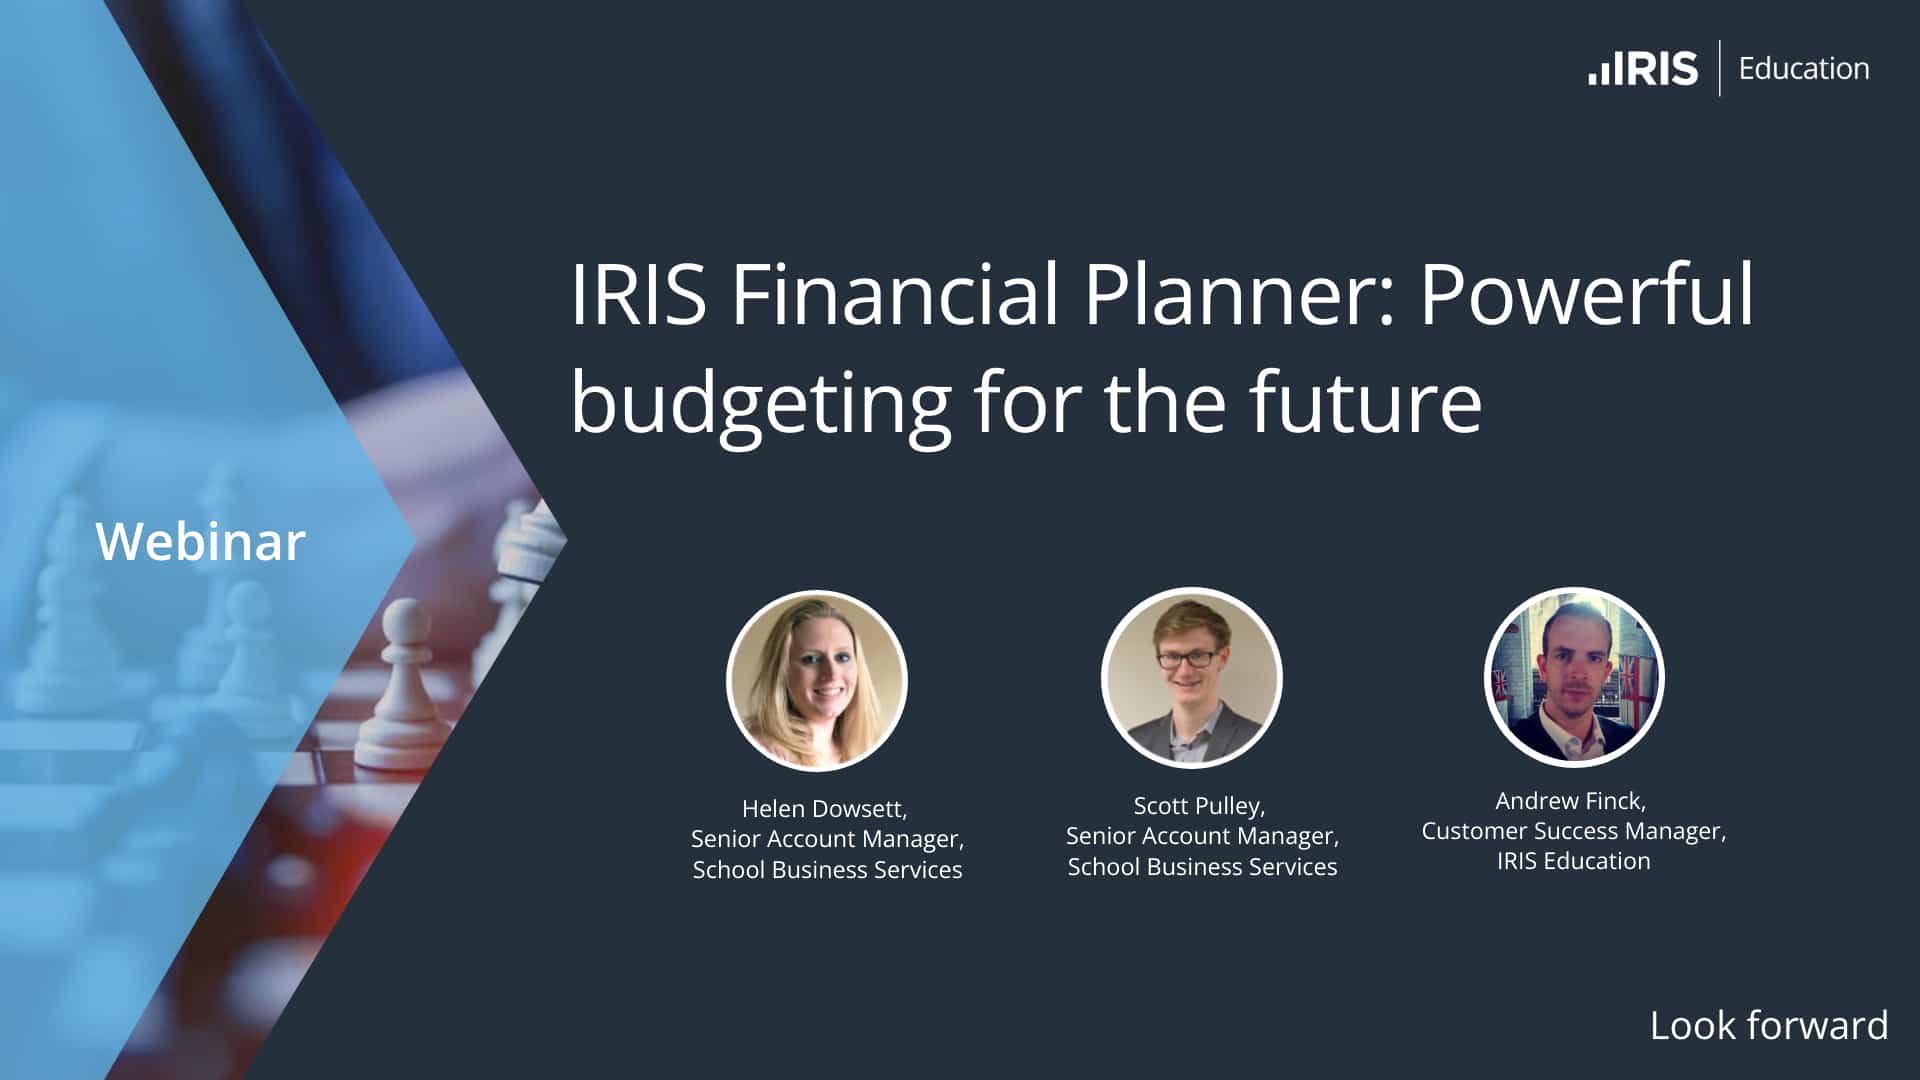 IRIS Financial Planner Powerful budgeting for the future Holding Screen 08.11.21 | IRIS Financial Planner: Powerful budgeting for the future